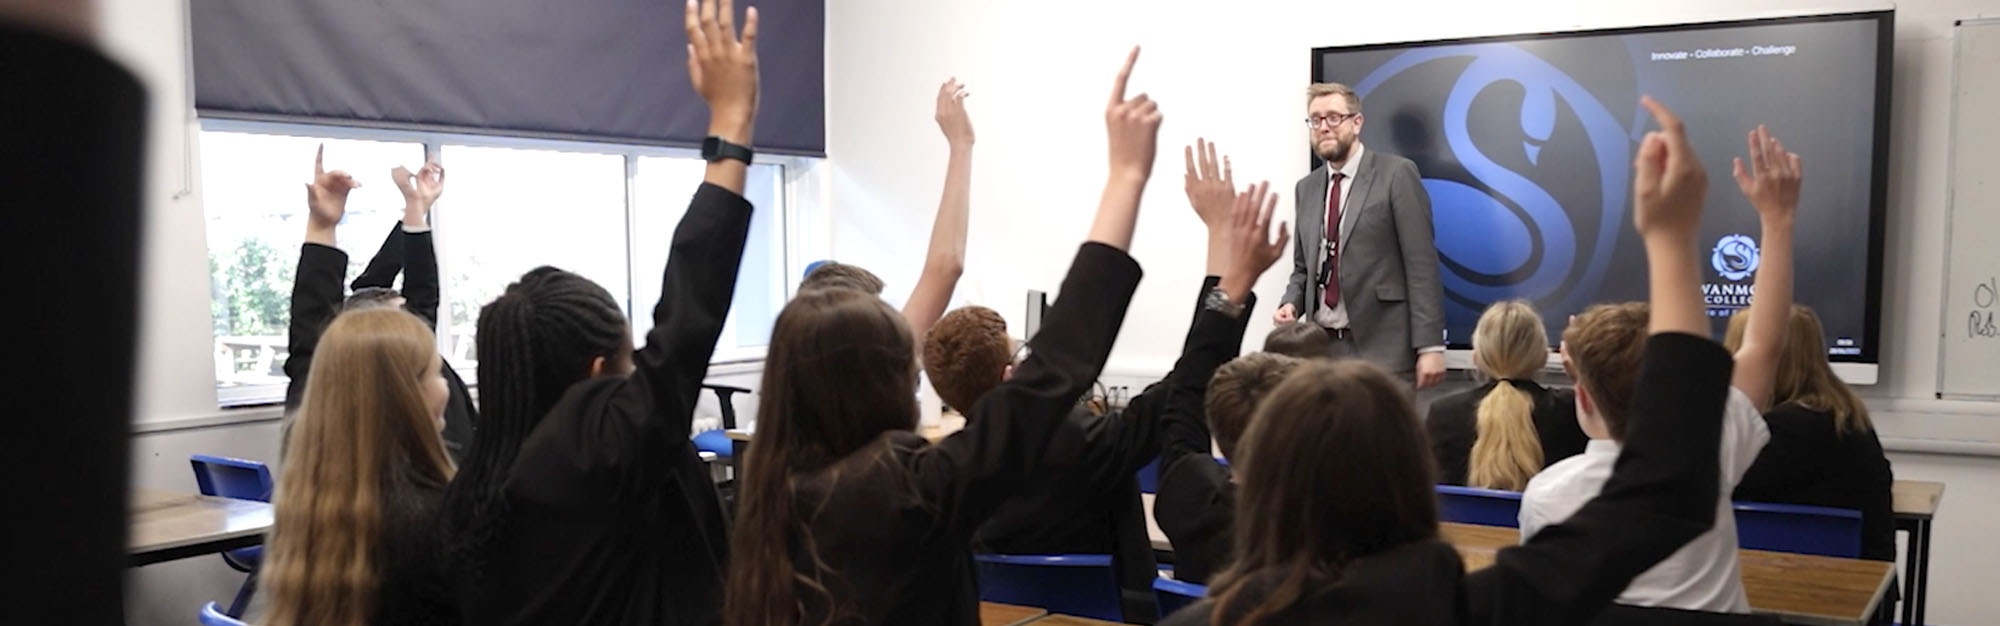 Image shows pupils putting their hands up in class.